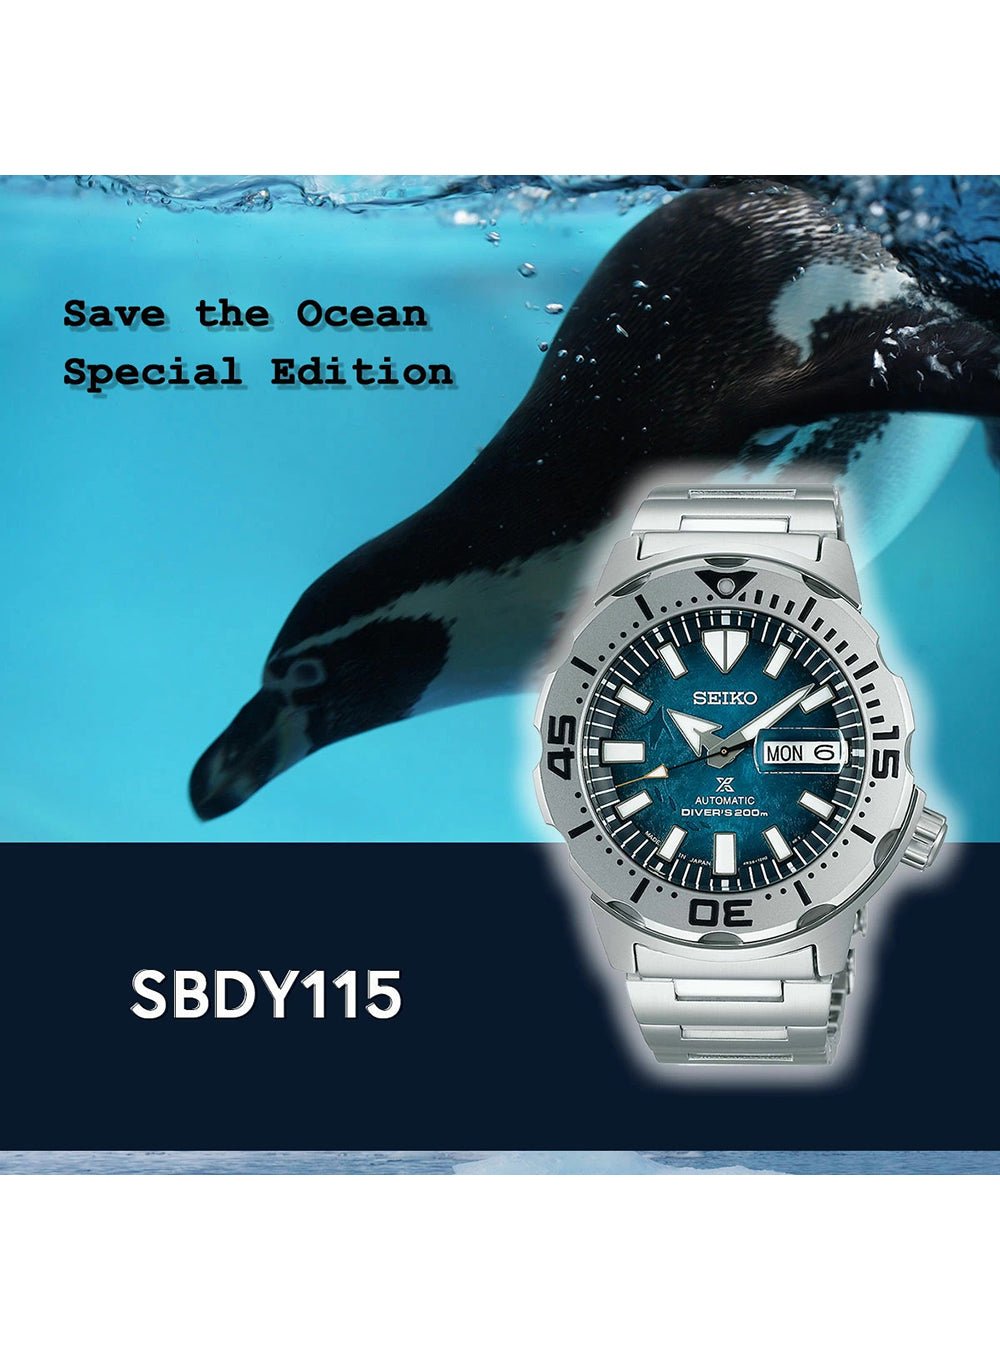 SEIKO PROSPEX DIVER SCUBA SAVE THE OCEAN SPECIAL EDITION MONSTER SBDY115  MADE IN JAPAN JDM